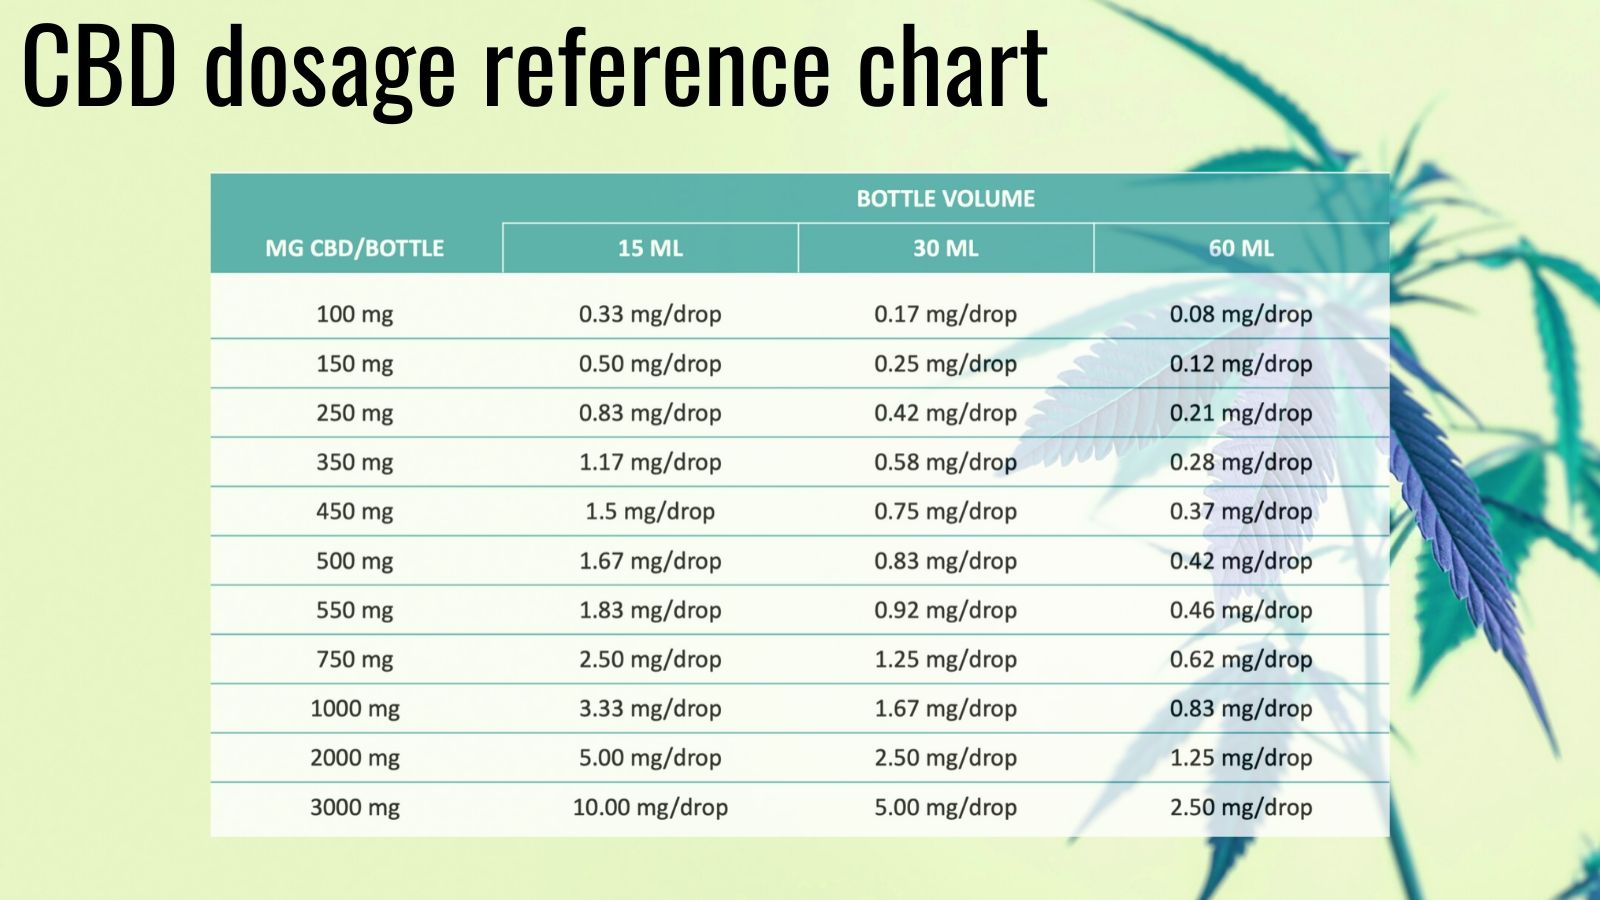 A reference guide for calculating different doses based on concentrations and bottle volume, by My Supply Co